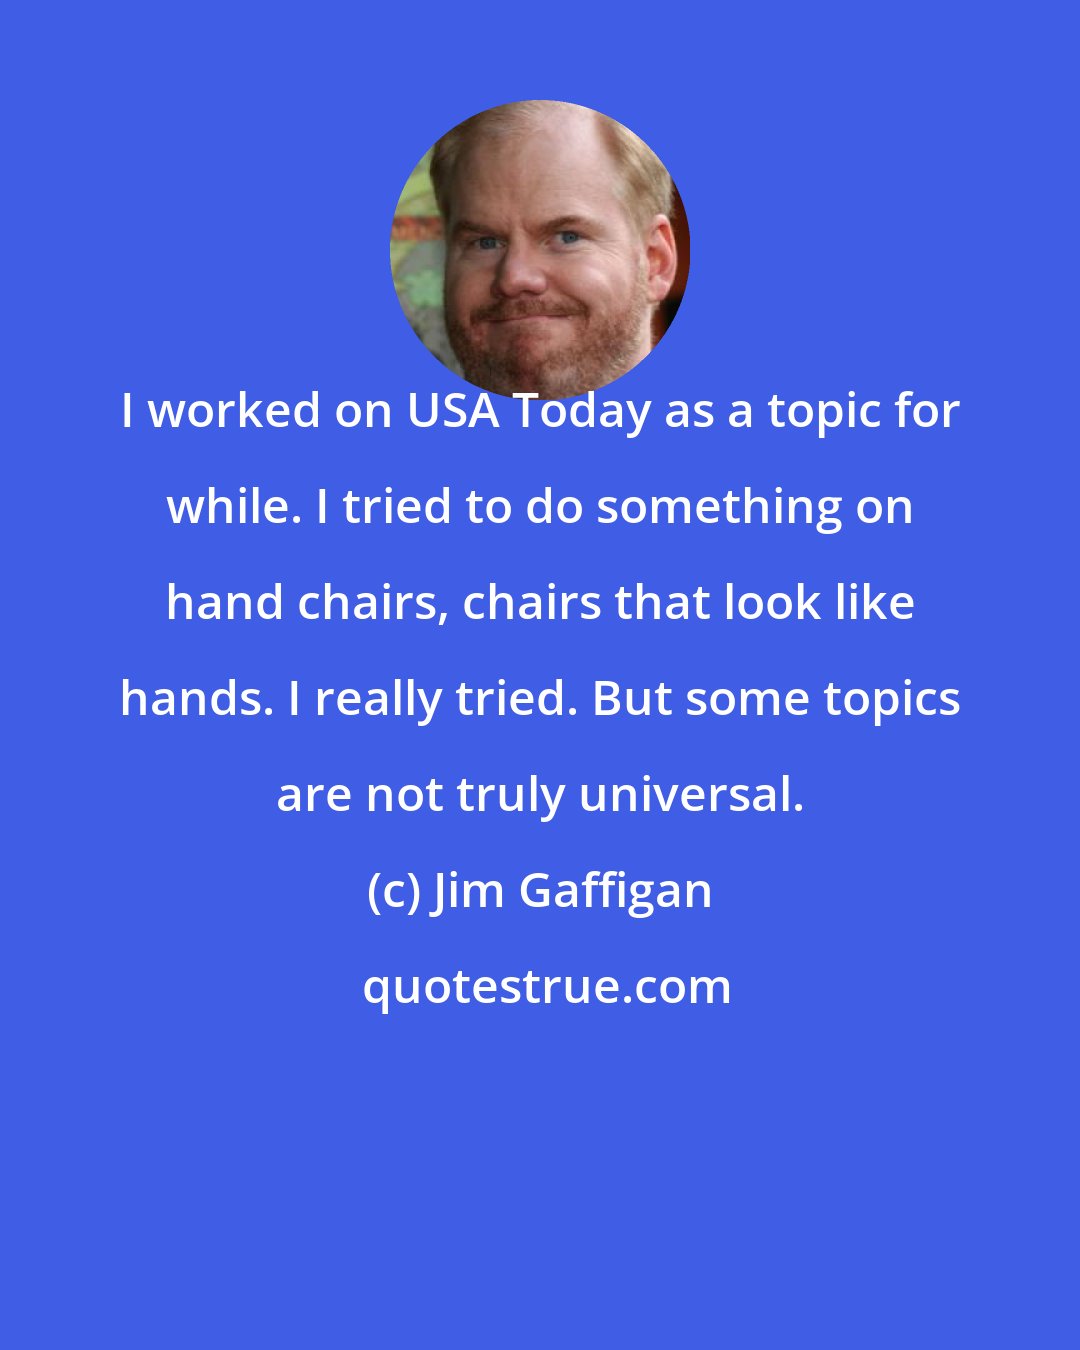 Jim Gaffigan: I worked on USA Today as a topic for while. I tried to do something on hand chairs, chairs that look like hands. I really tried. But some topics are not truly universal.